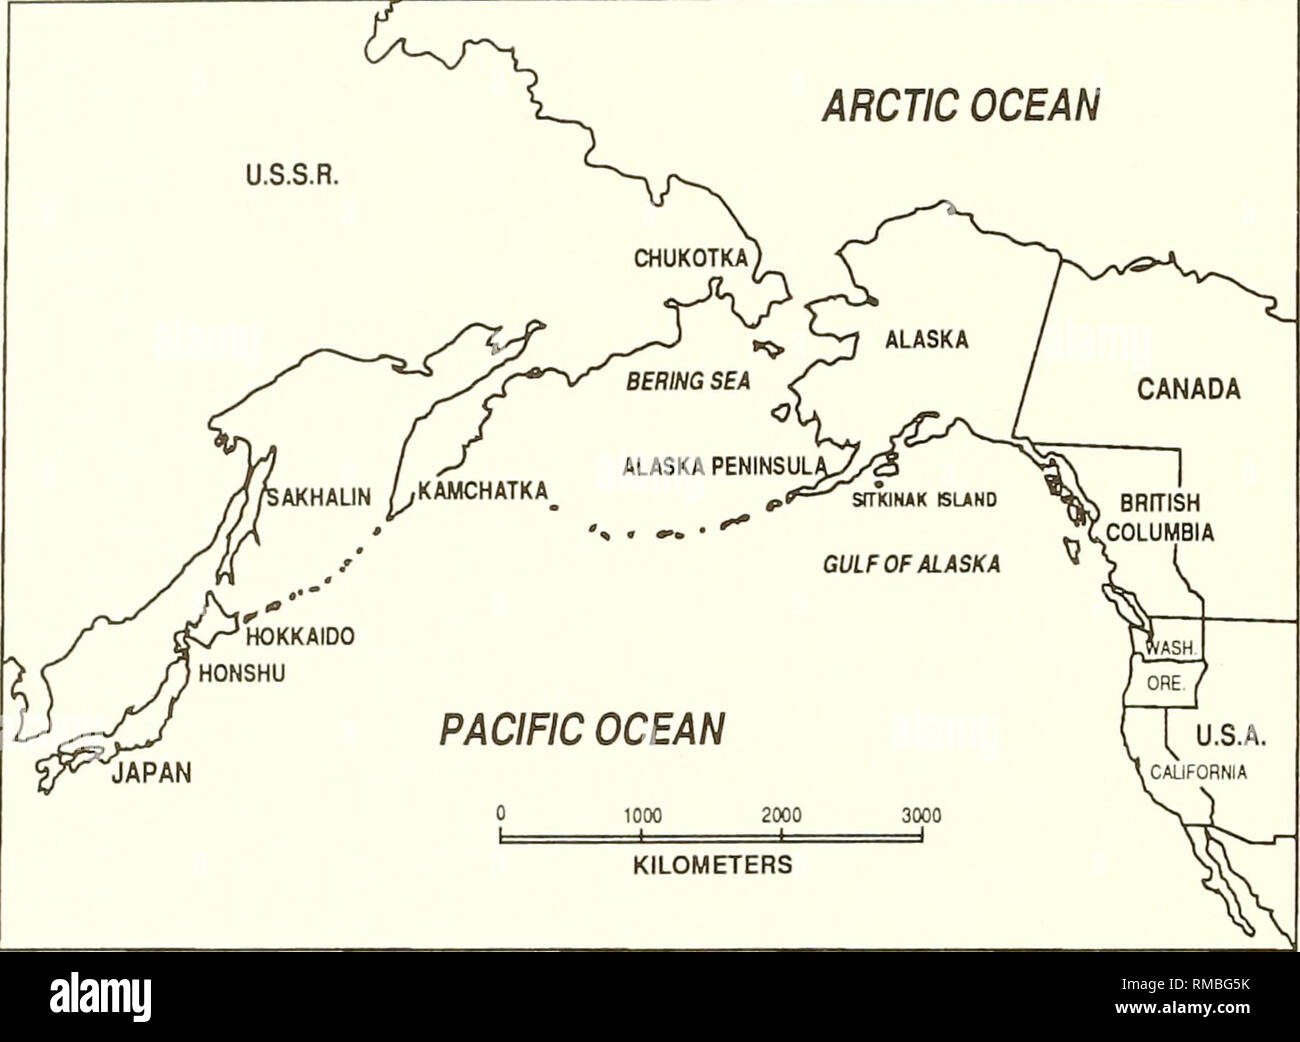 . Annual report - Western Society of Malacologists. Mollusks; Mollusks. Origin of the Modern Gulf of Alaska Cold-Water Molluscan Fauna. ARCTIC OCEAN. KILOMETERS Figure 1. Index map showing location of the Gulf of Alaska. PLIOCENE AND PLEISTOCENE MOLLUSCS IN MARINE TRANSGRESSIONS OF WESTERN AND NORTHERN ALASKA Louie Marincovich, Jr. and Charles L. Powell, II U.S. Geological Survey 345 Middlefield Road Menio Park, CA 94025 Introduction Pliocene and Pleistocene marine deposits mantle coastal areas of western and northern Alaska from the Bering Strait region north- and eastward to the Cana- dian b Stock Photo